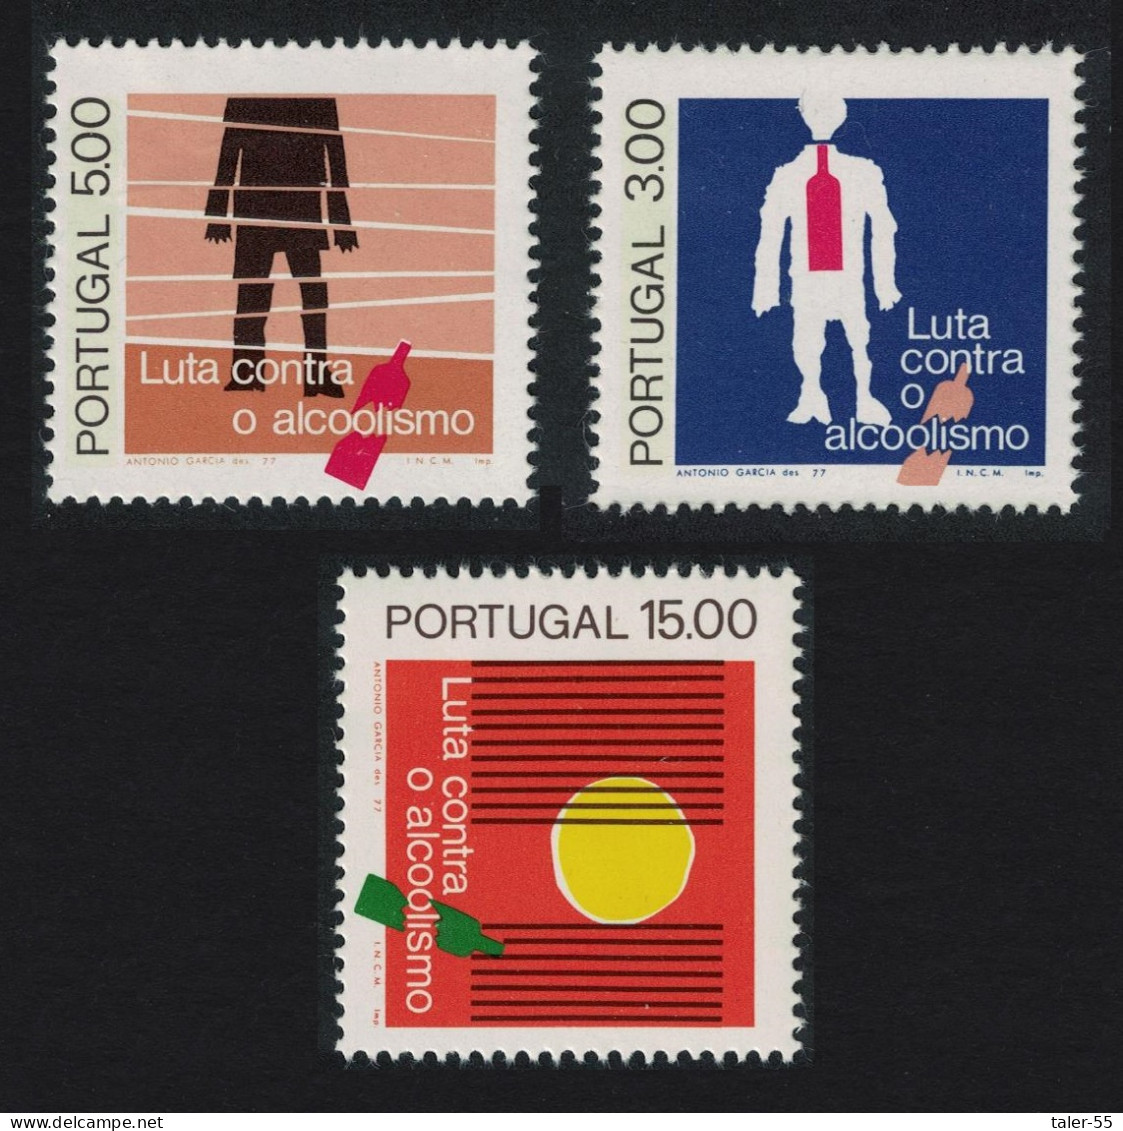 Portugal 10th Anniversary Of Portuguese Anti-Alcoholic Society 3v 1977 MNH SG#1643-1645 - Unused Stamps